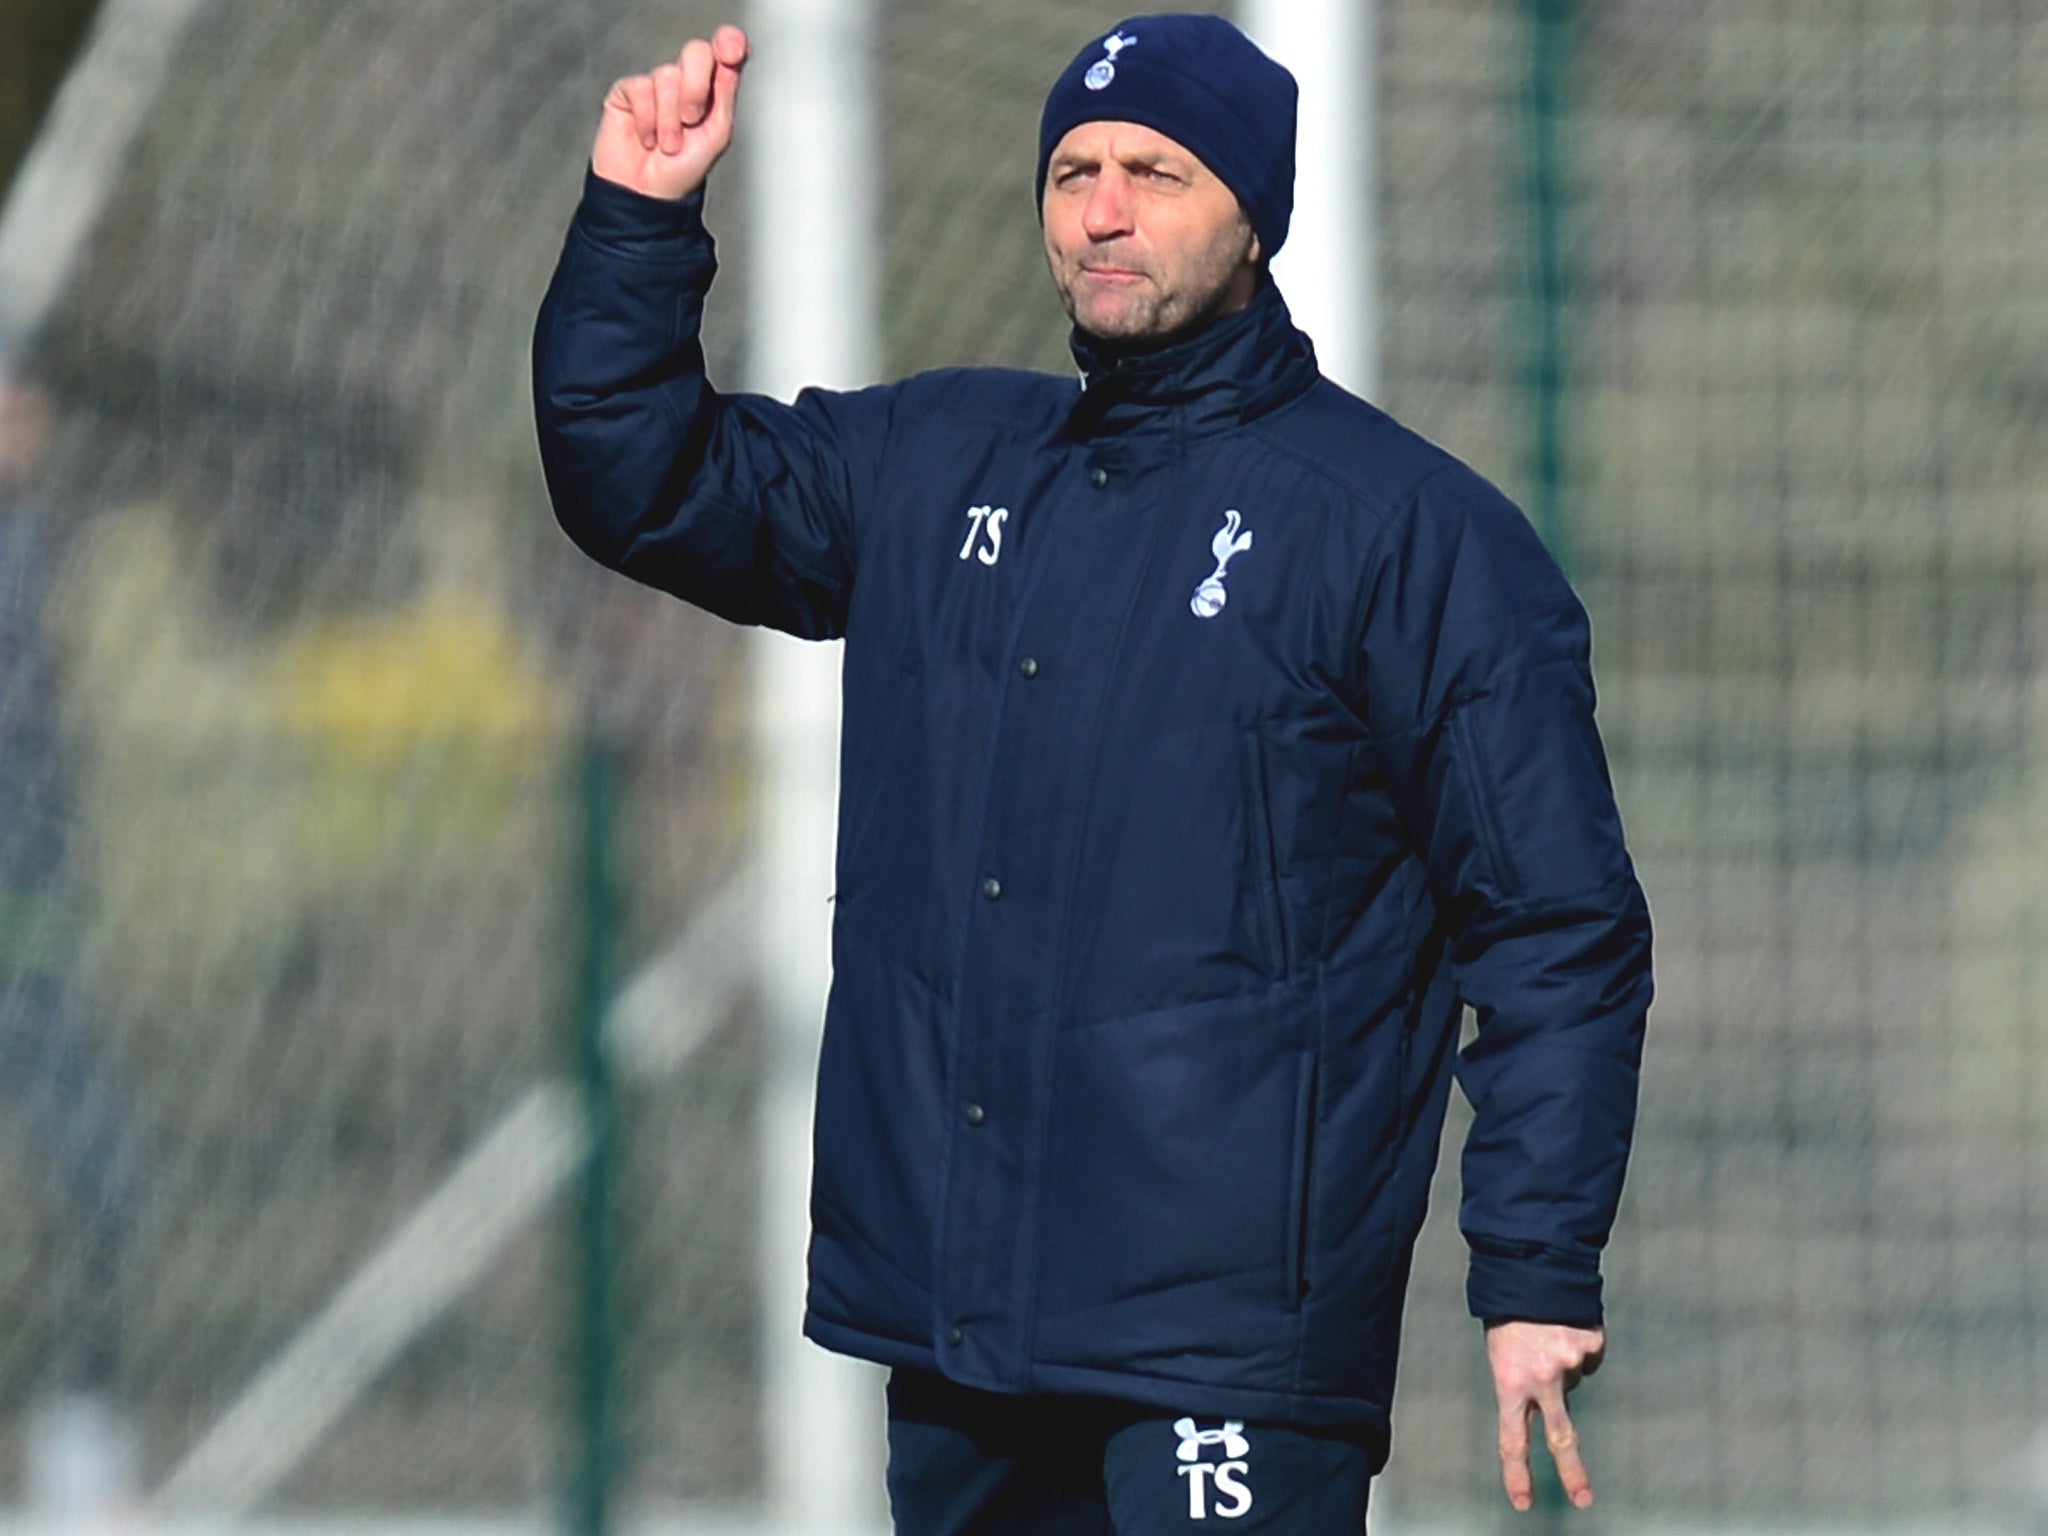 Tim Sherwood issues instructions during a training session